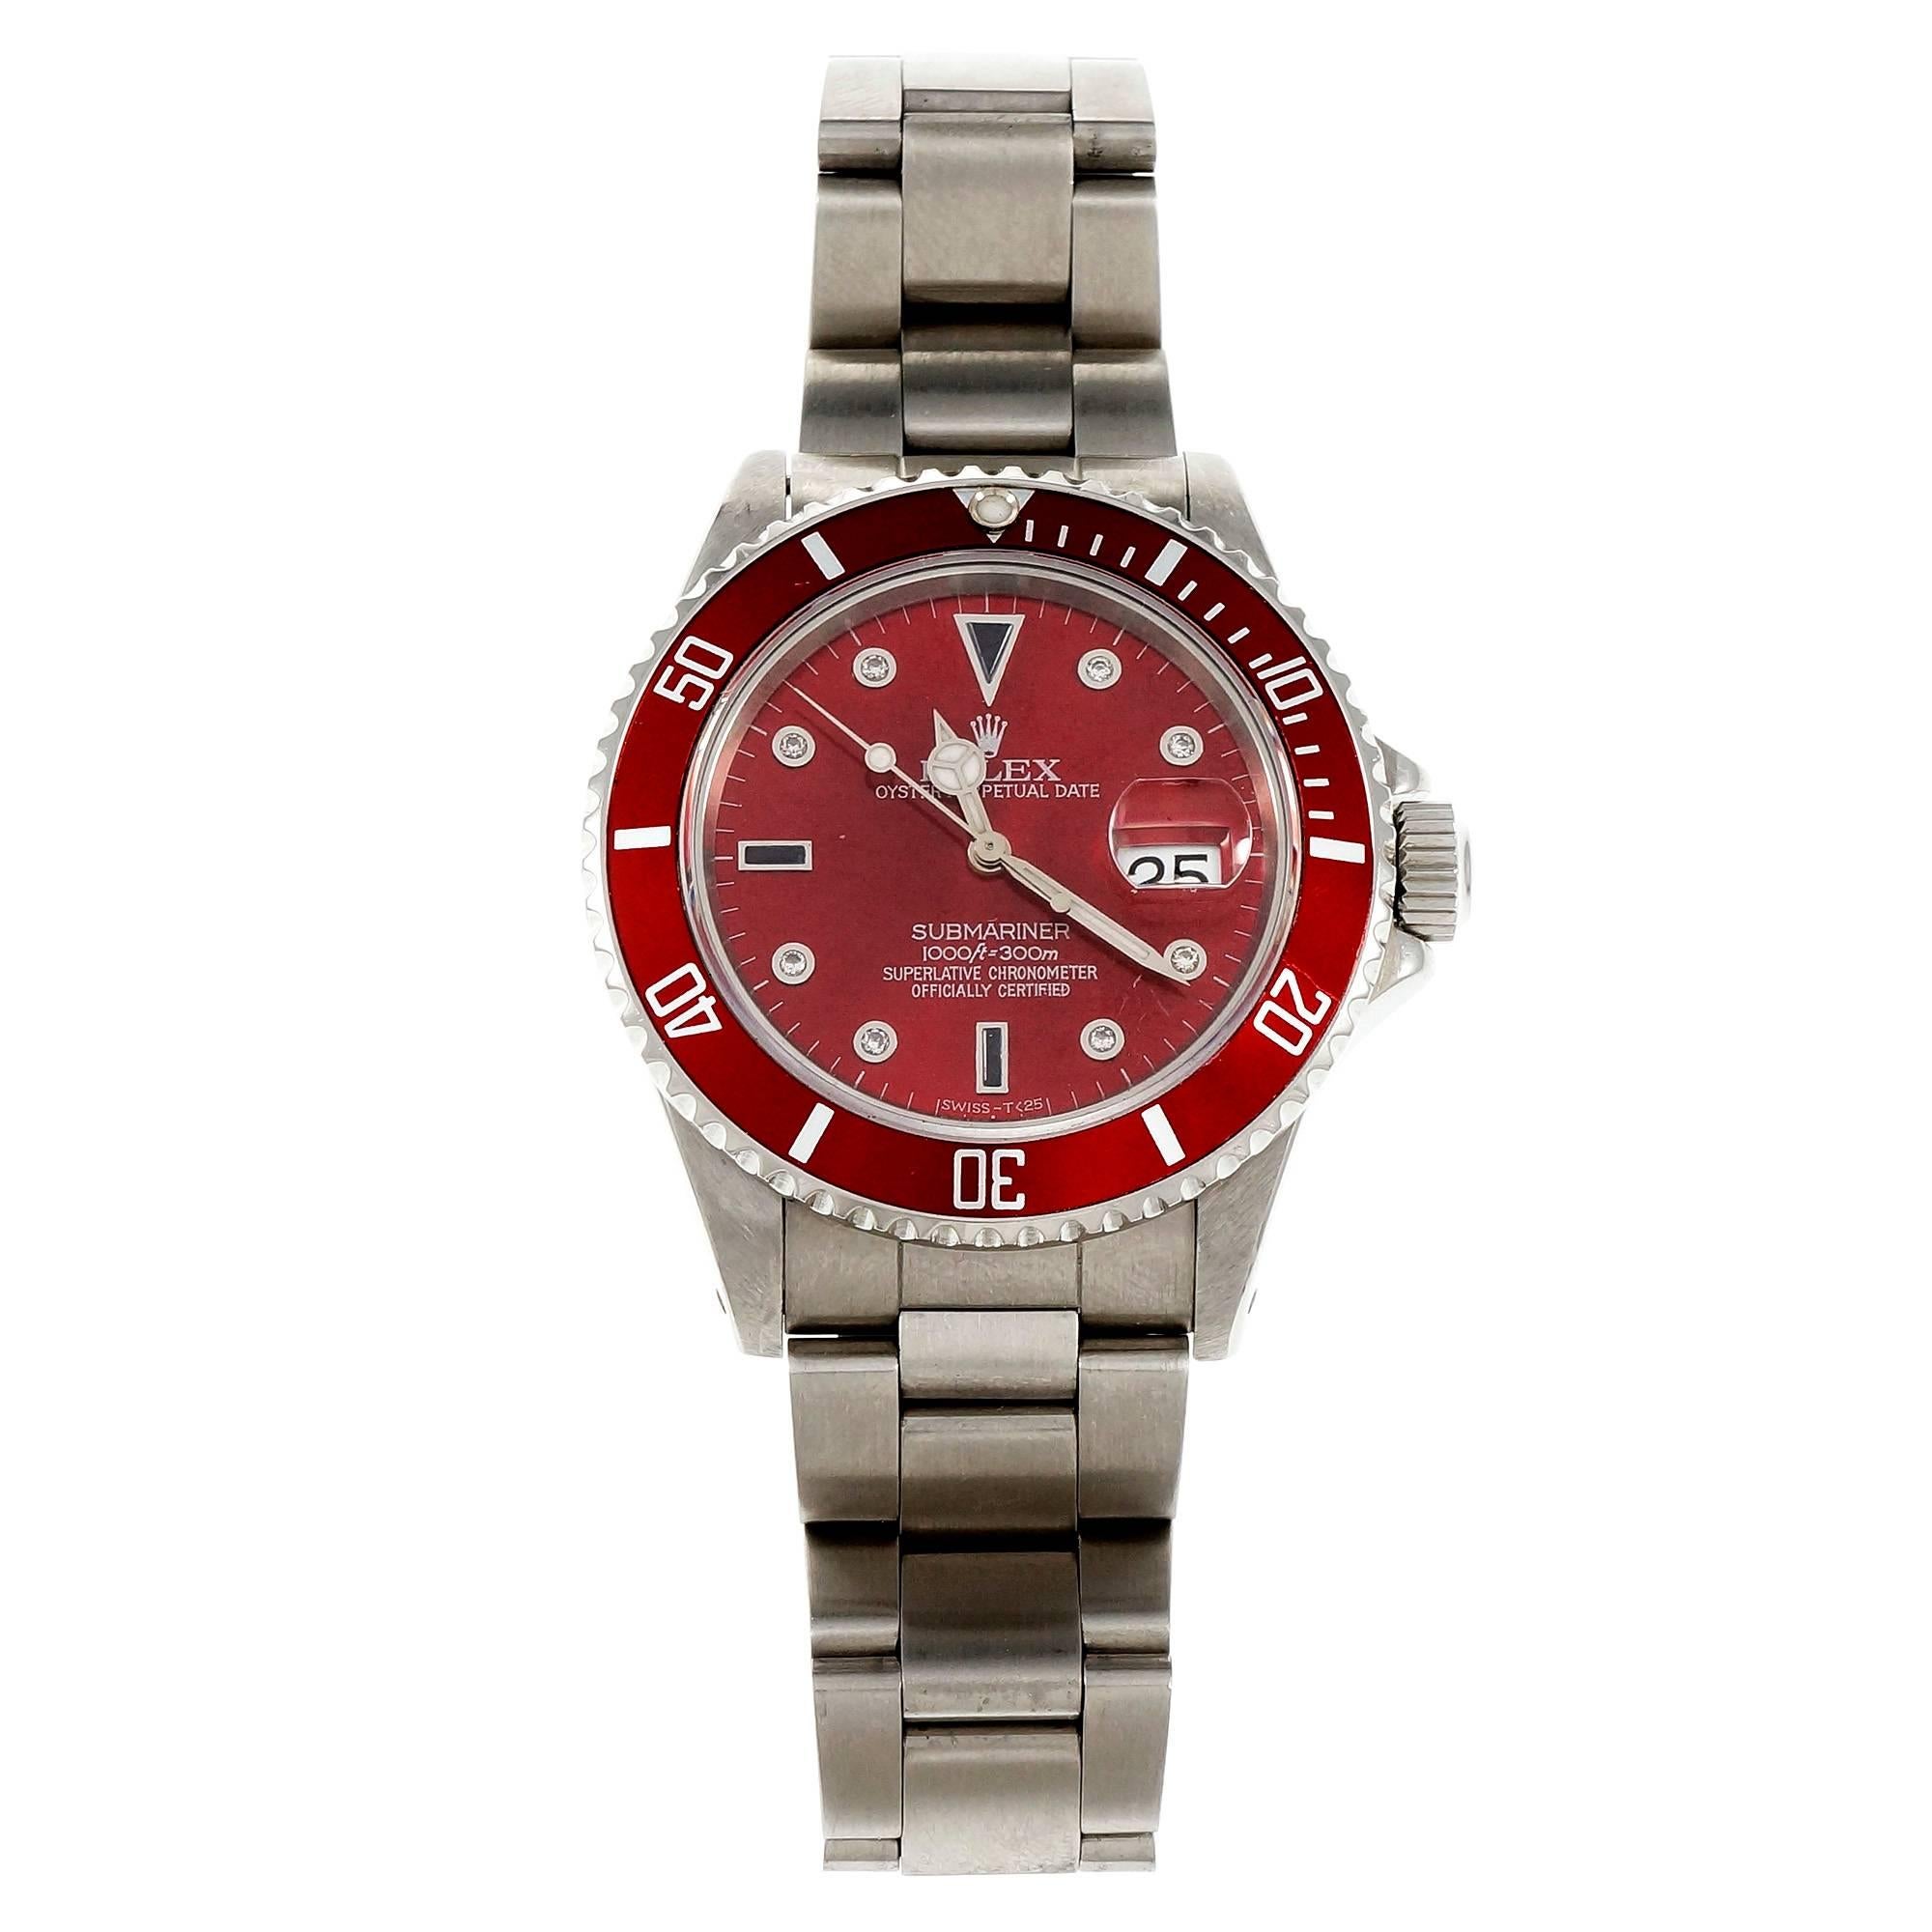 Steel Rolex Submariner 168000 with customized bright red Serti dial and red bezel rim. Matt finish Rolex Oyster band. Customized Red on red bezel and dial with diamond and sapphire markers.  ©1988.

Steel
Diamond and Sapphire markers.
133.3